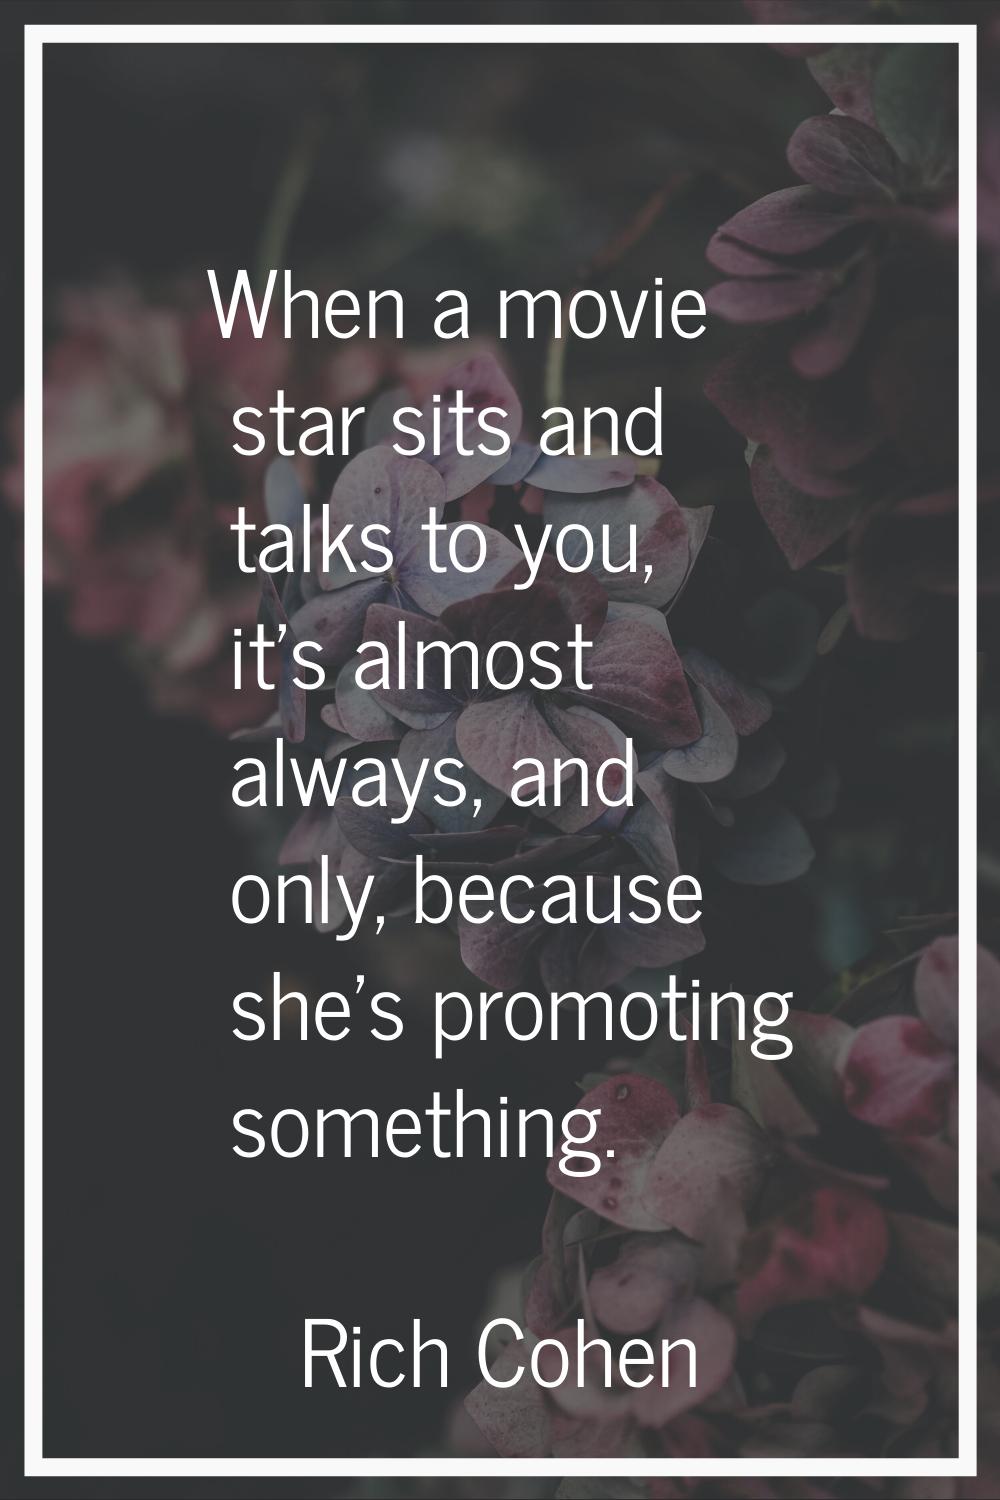 When a movie star sits and talks to you, it's almost always, and only, because she's promoting some